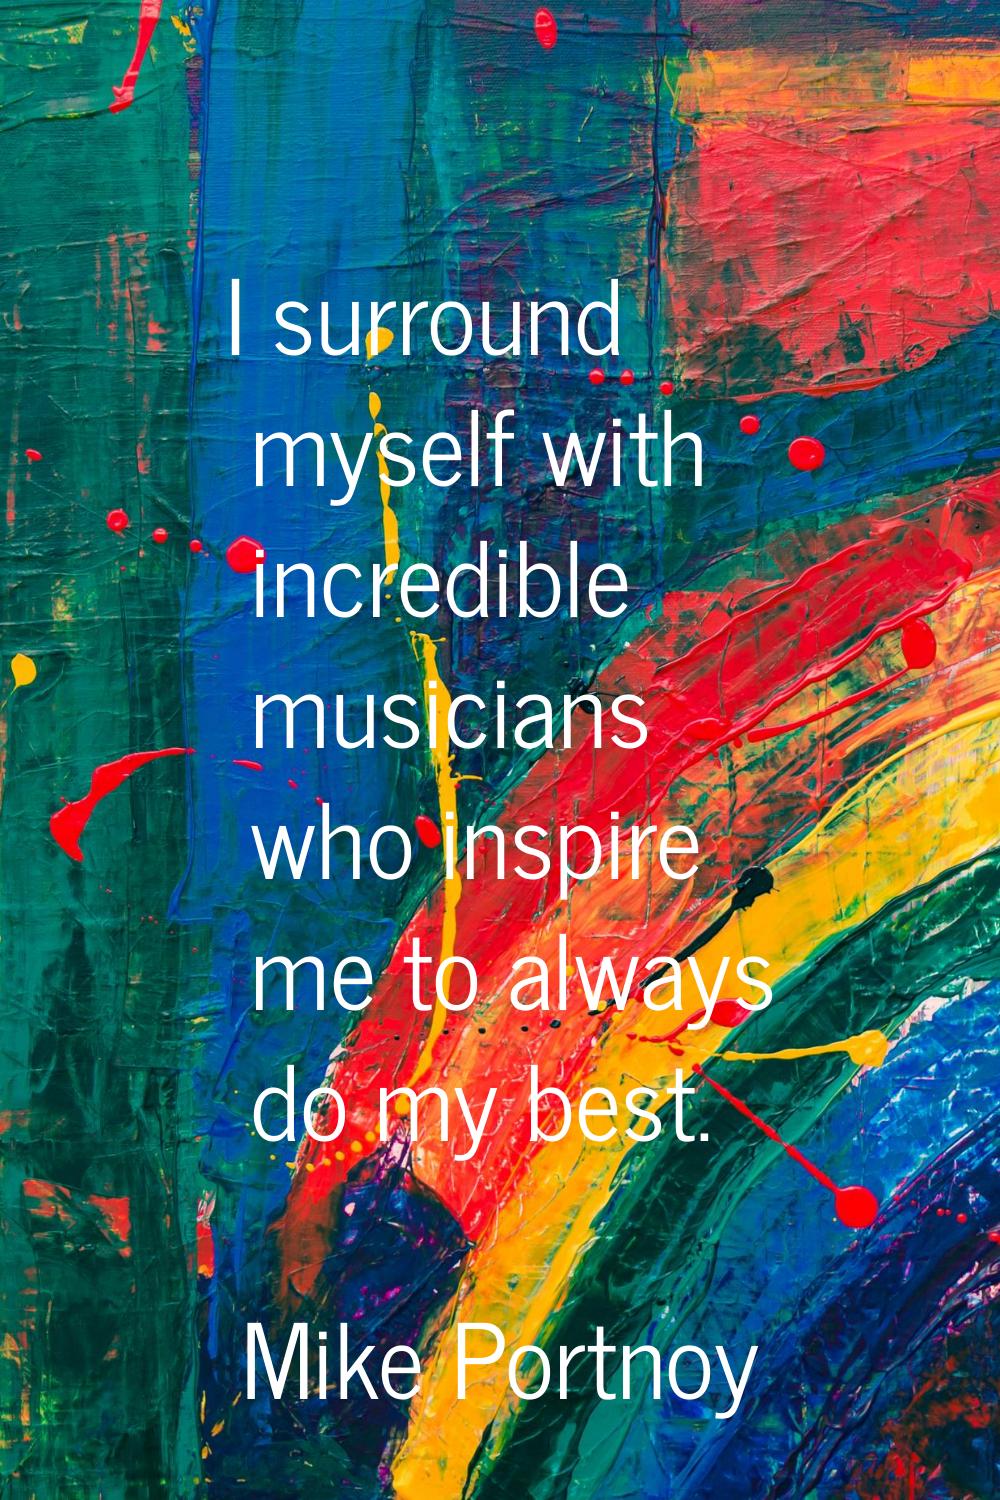 I surround myself with incredible musicians who inspire me to always do my best.